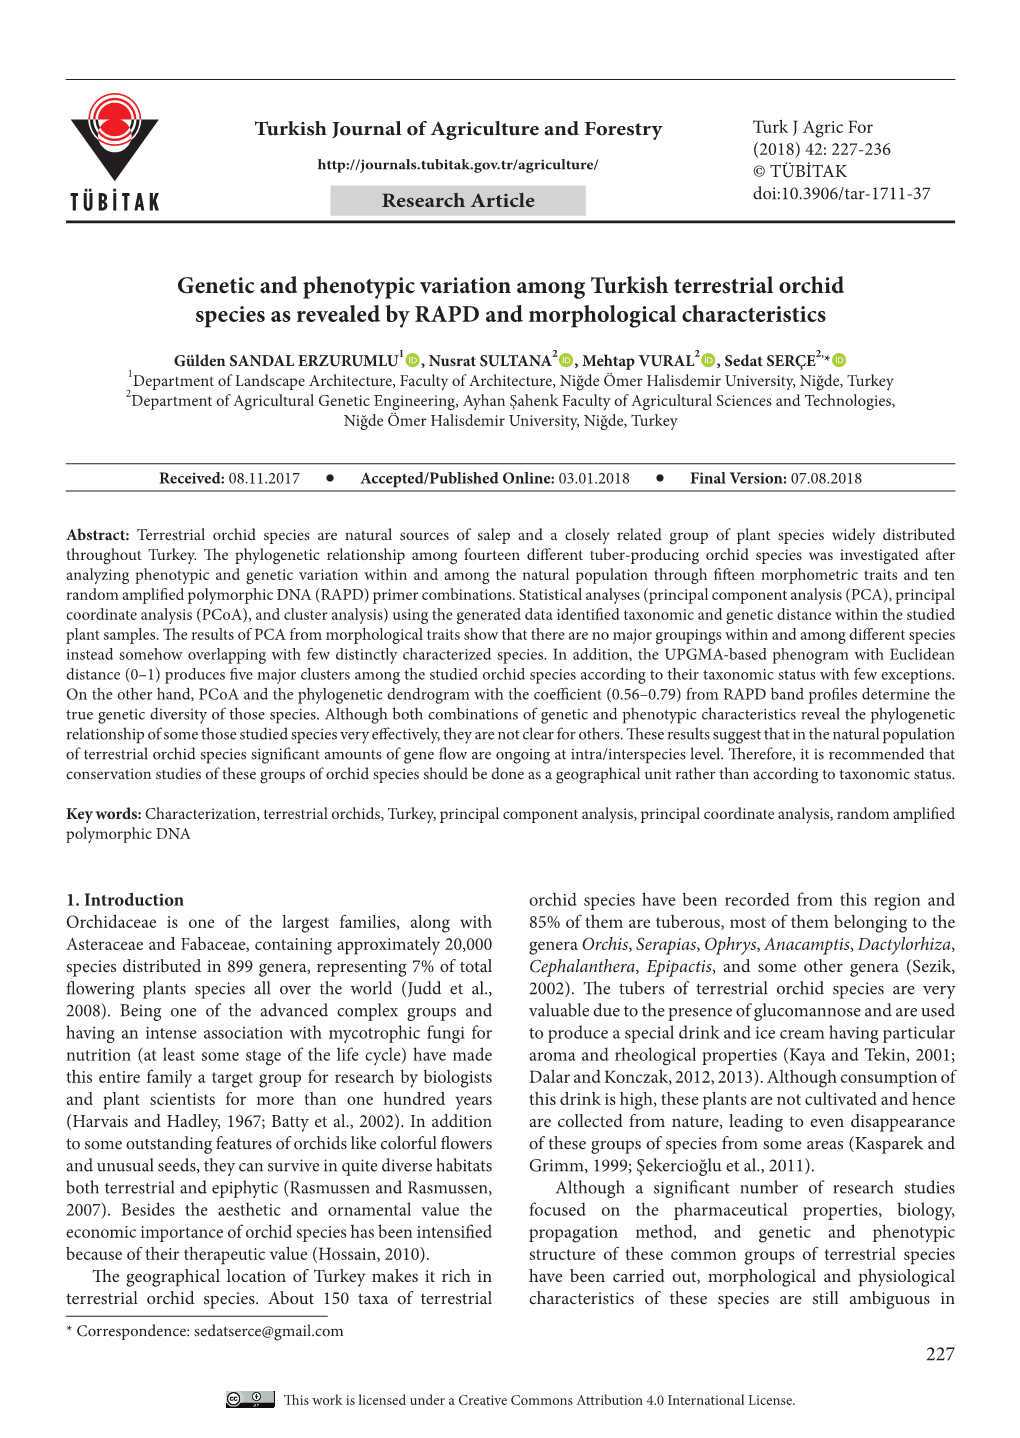 Genetic and Phenotypic Variation Among Turkish Terrestrial Orchid Species As Revealed by RAPD and Morphological Characteristics